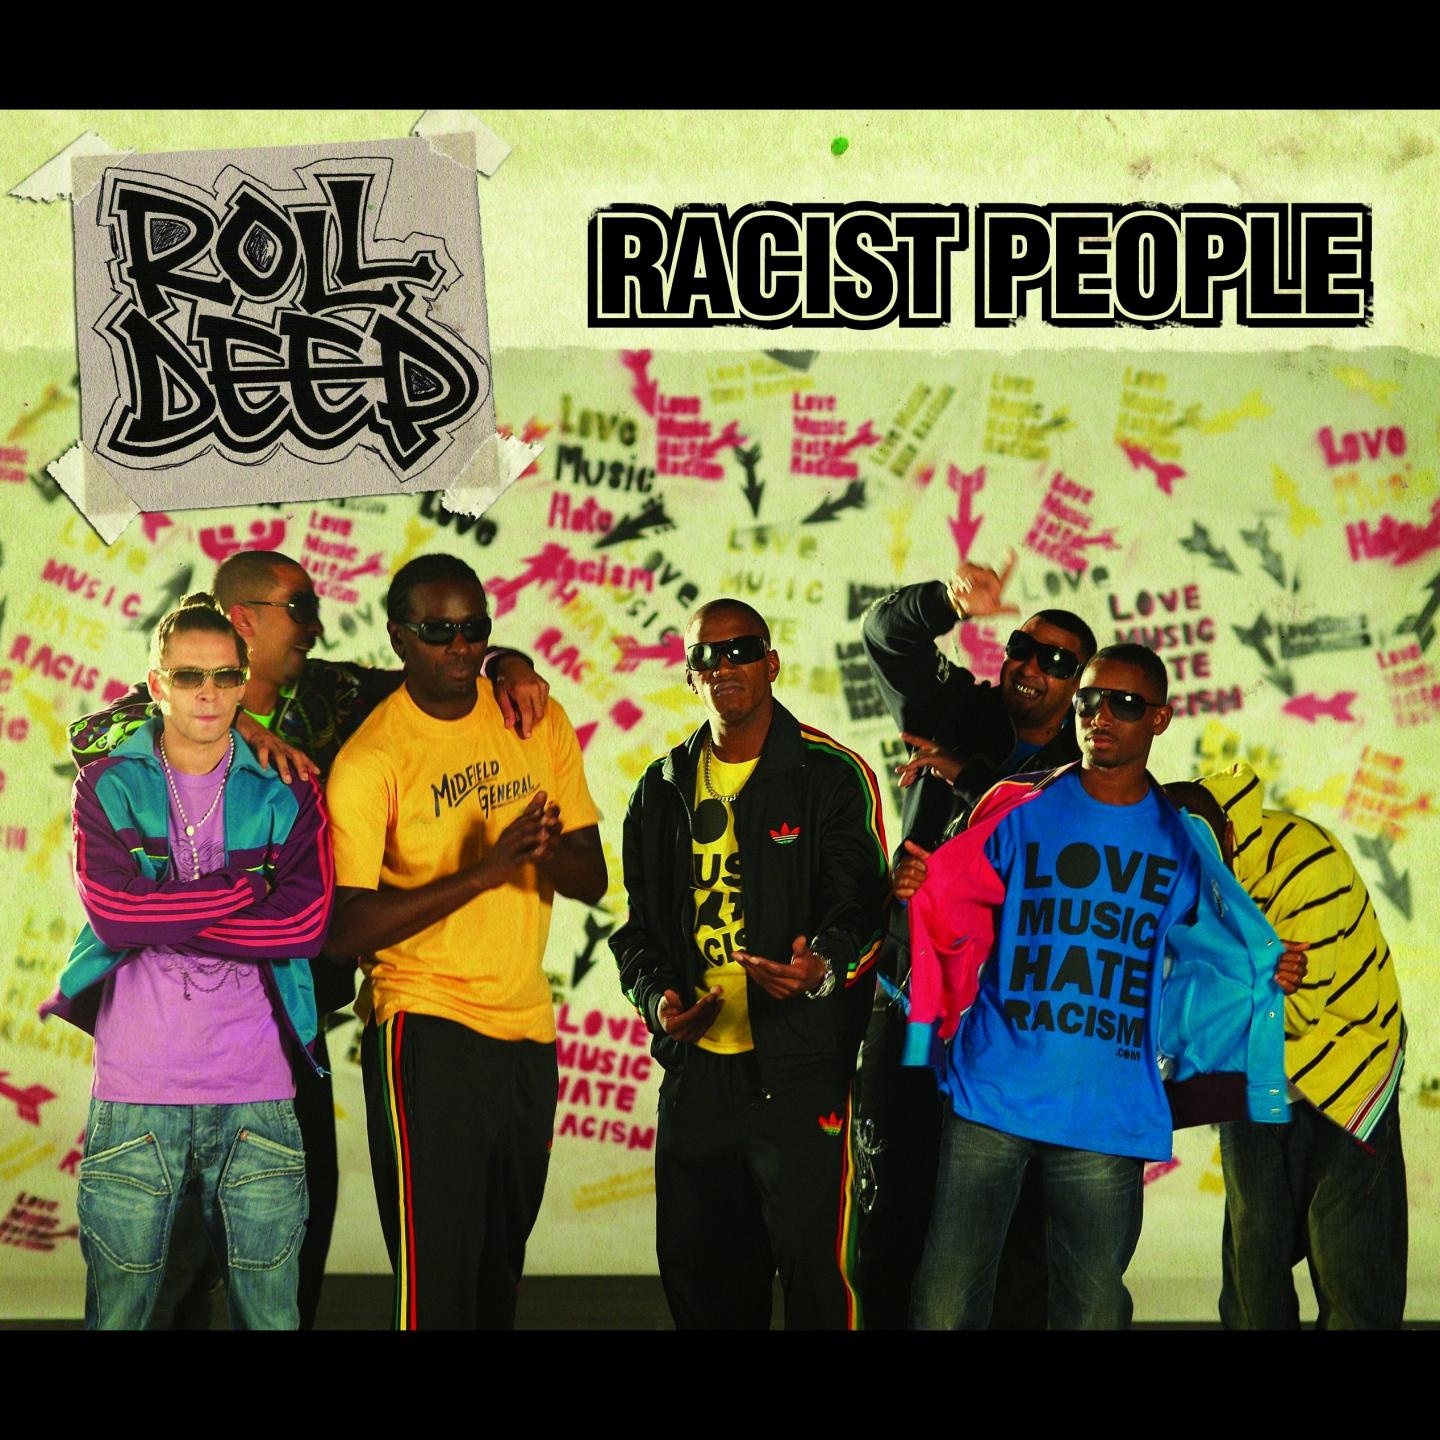 Racist People (Roll Deep Vocal Mix)